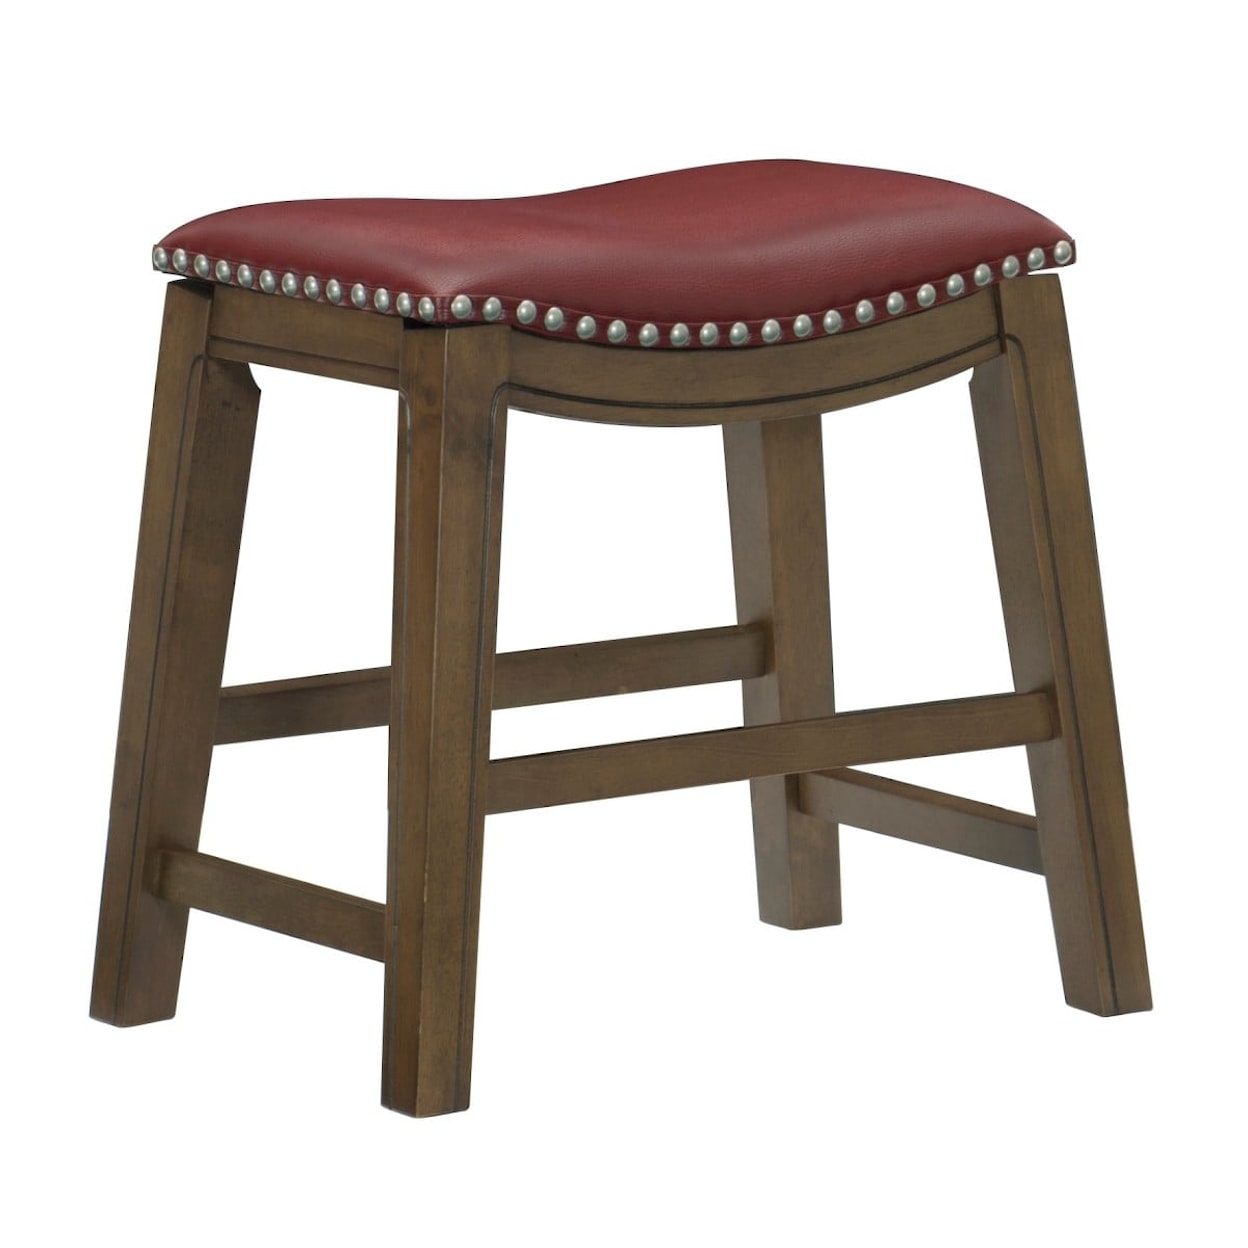 Homelegance Ordway 18 Dining Stool, Red